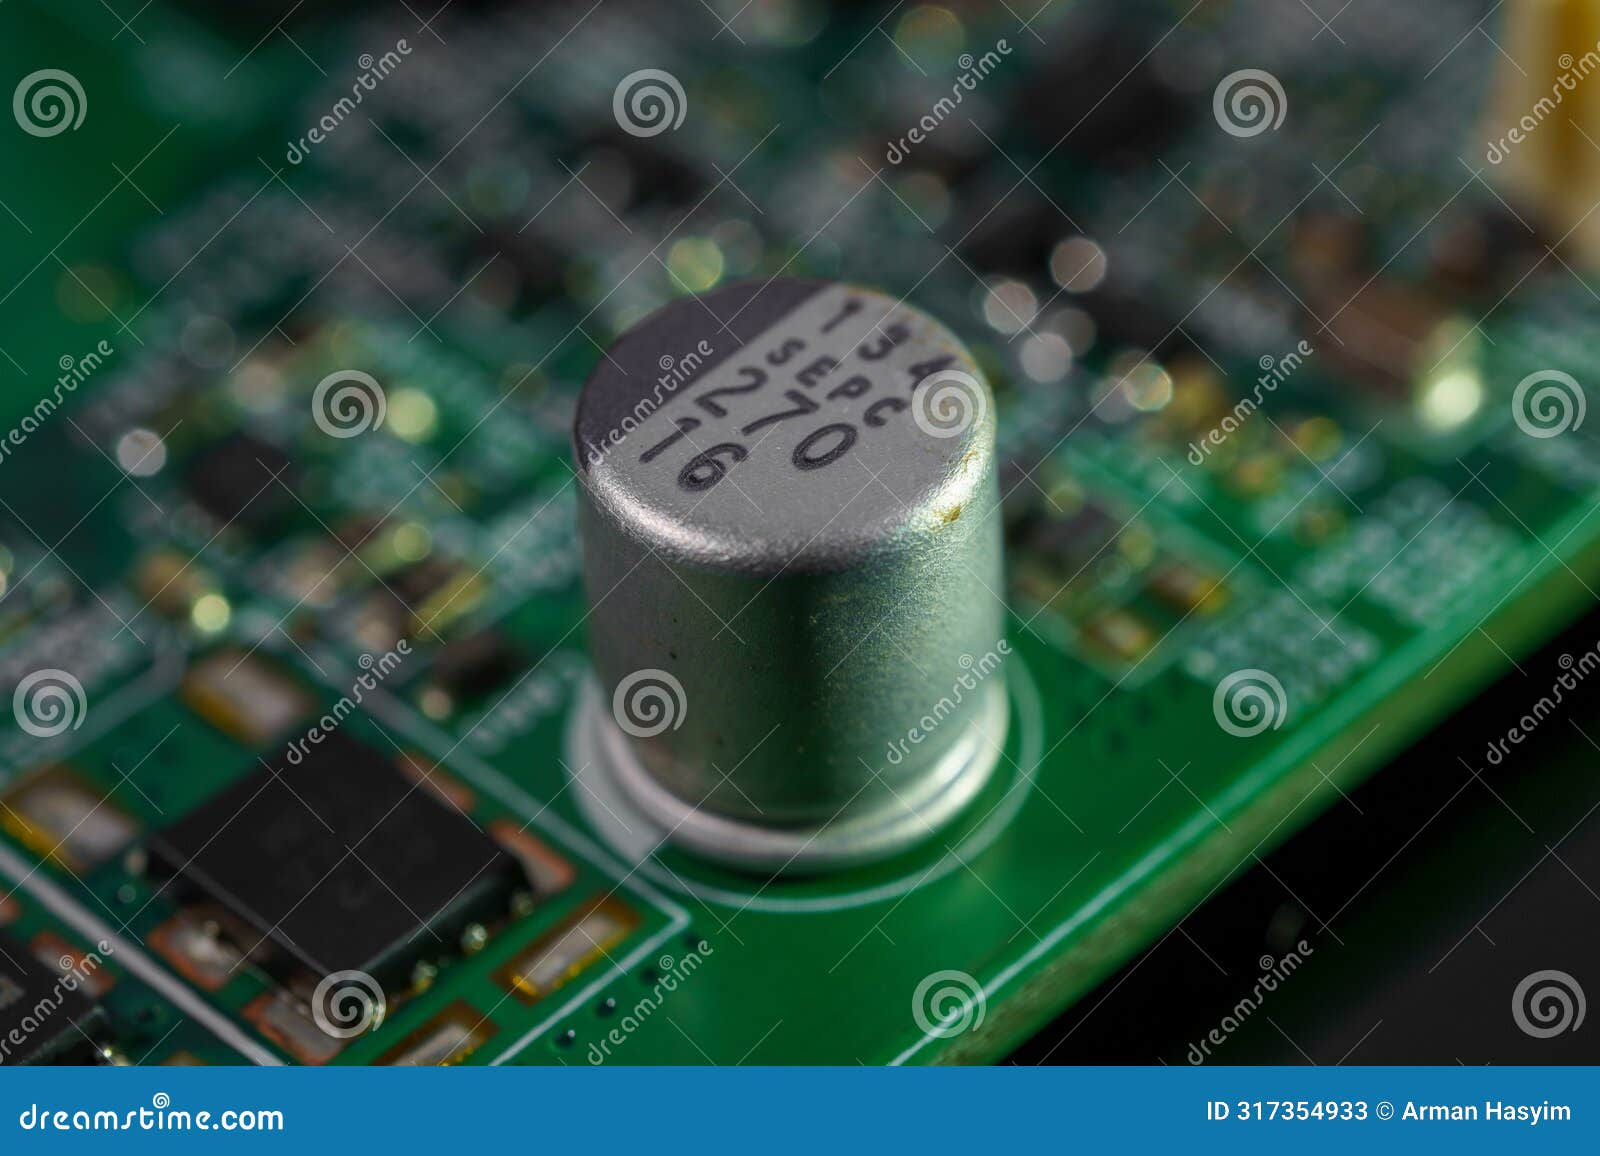 close-up view of an electronic component on a circuit board